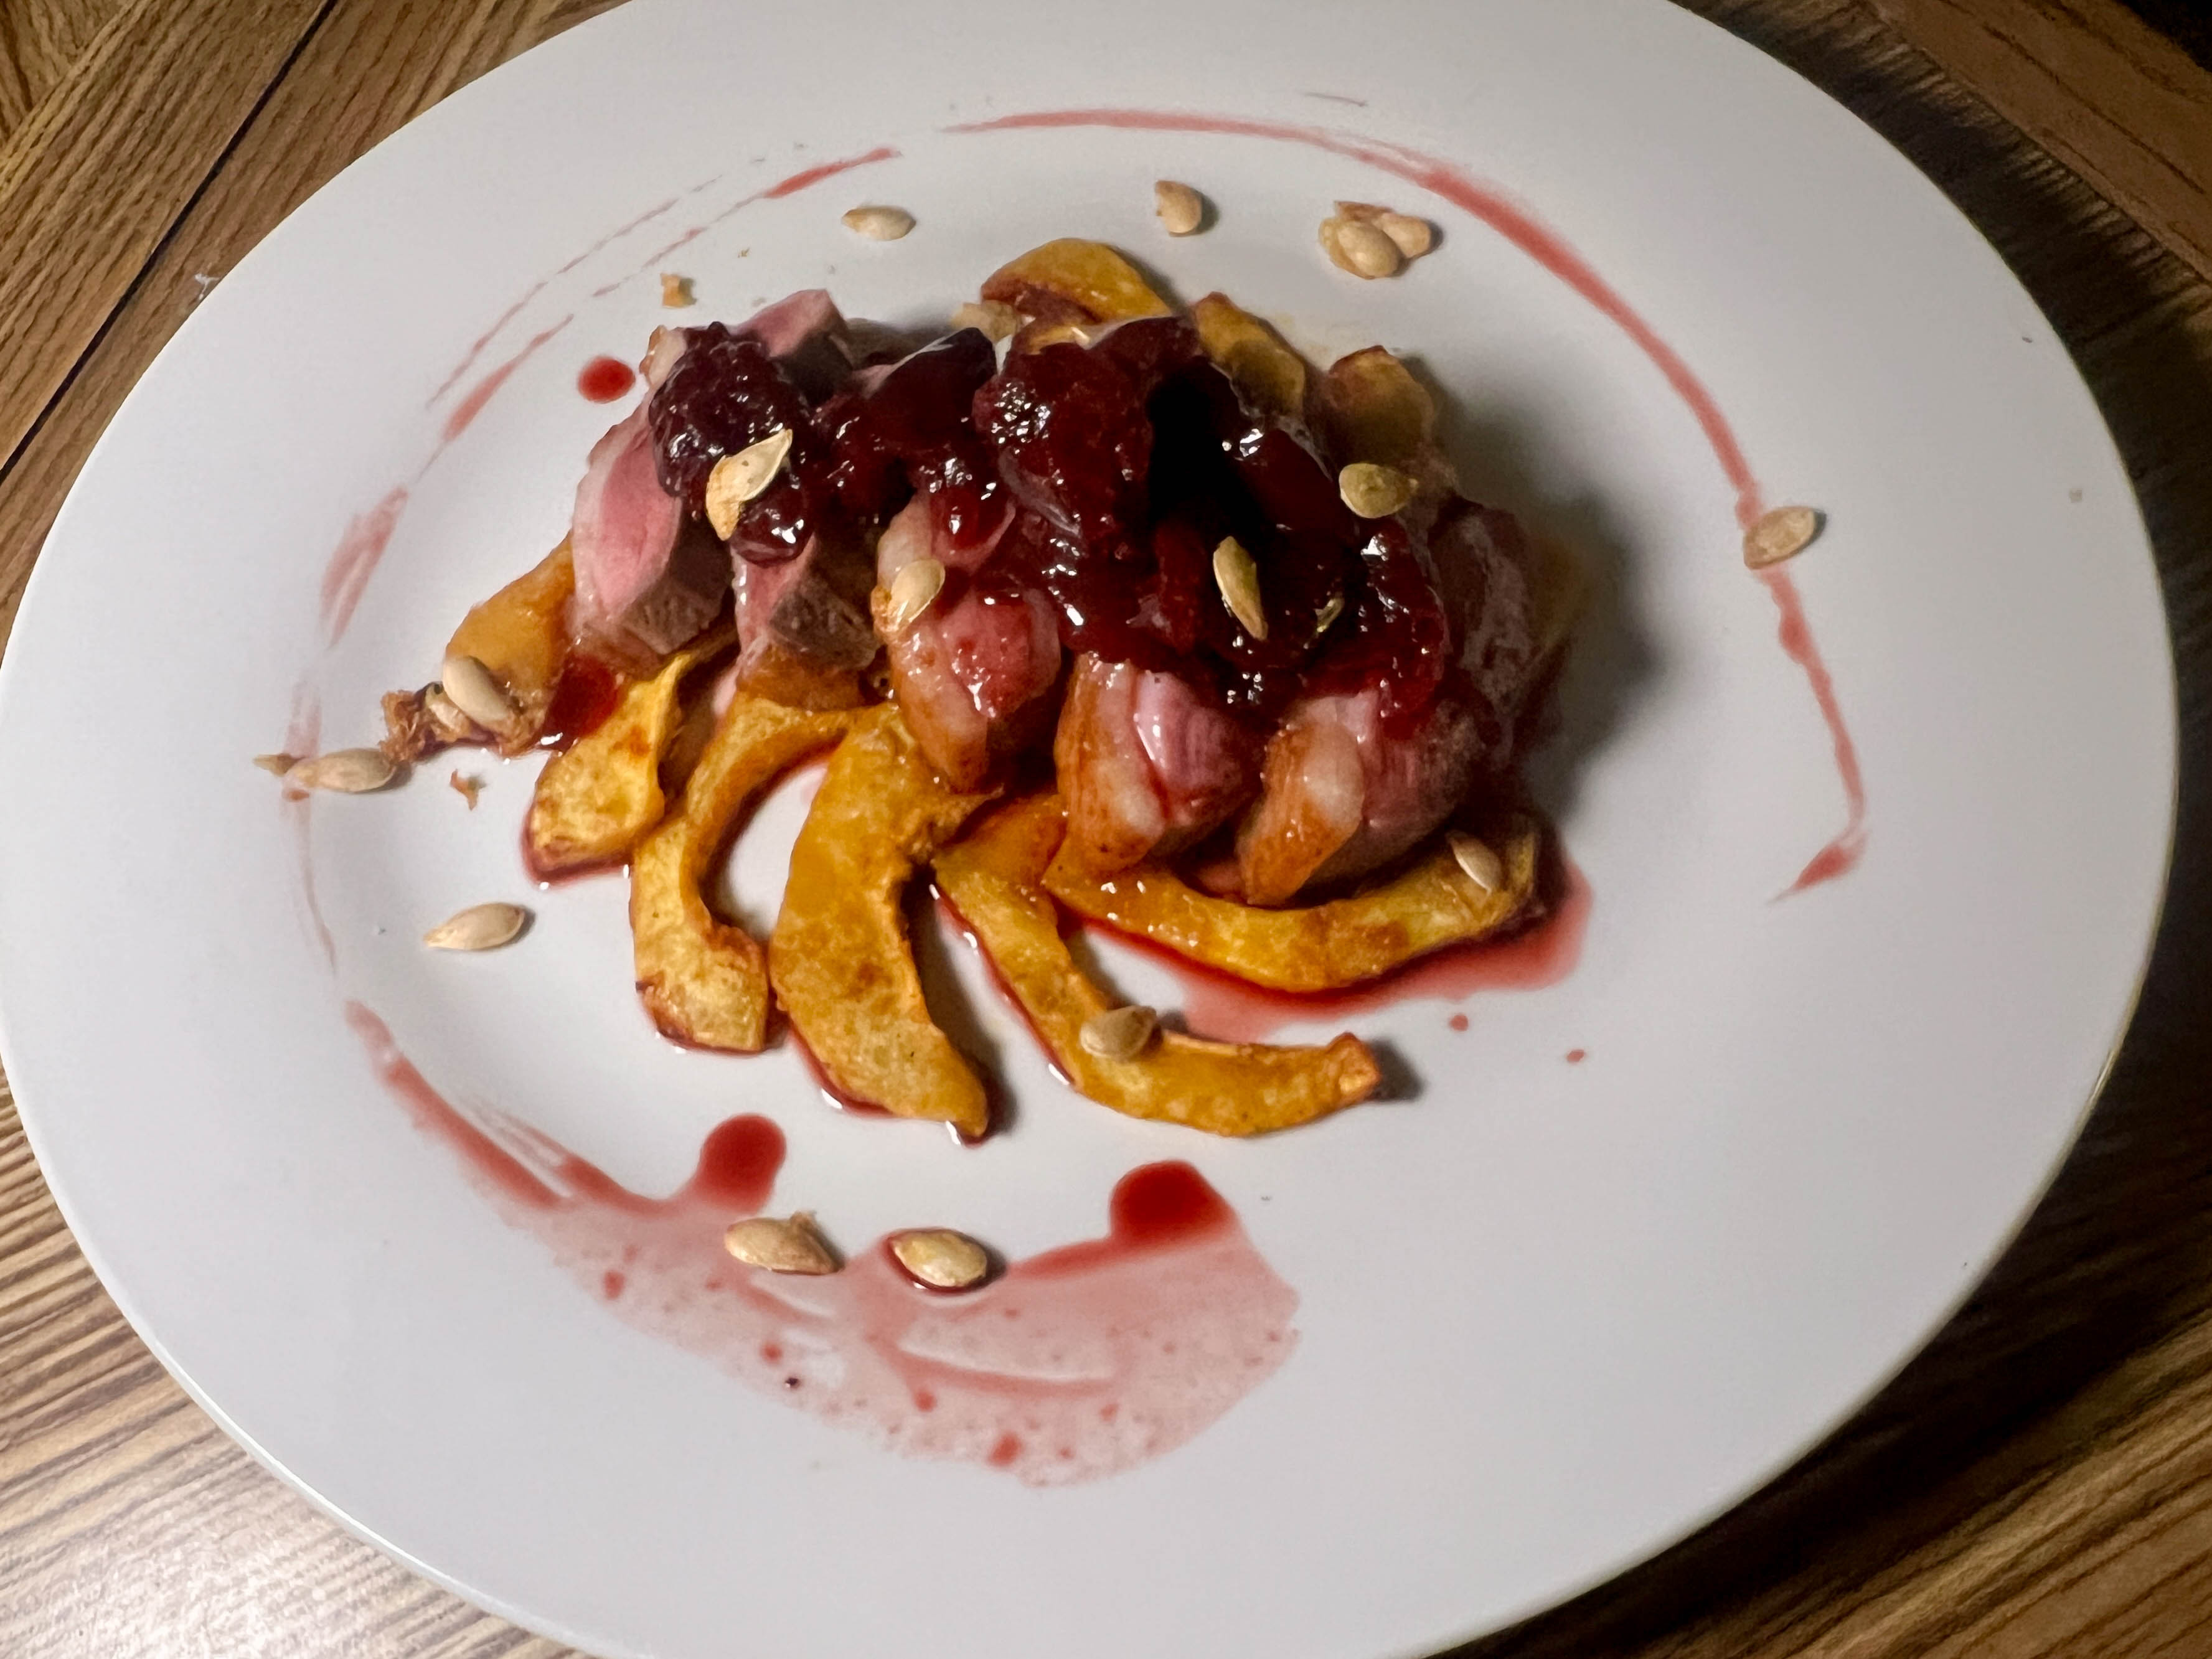 Pan seared duck, with braised cherries and roasted acorn squash